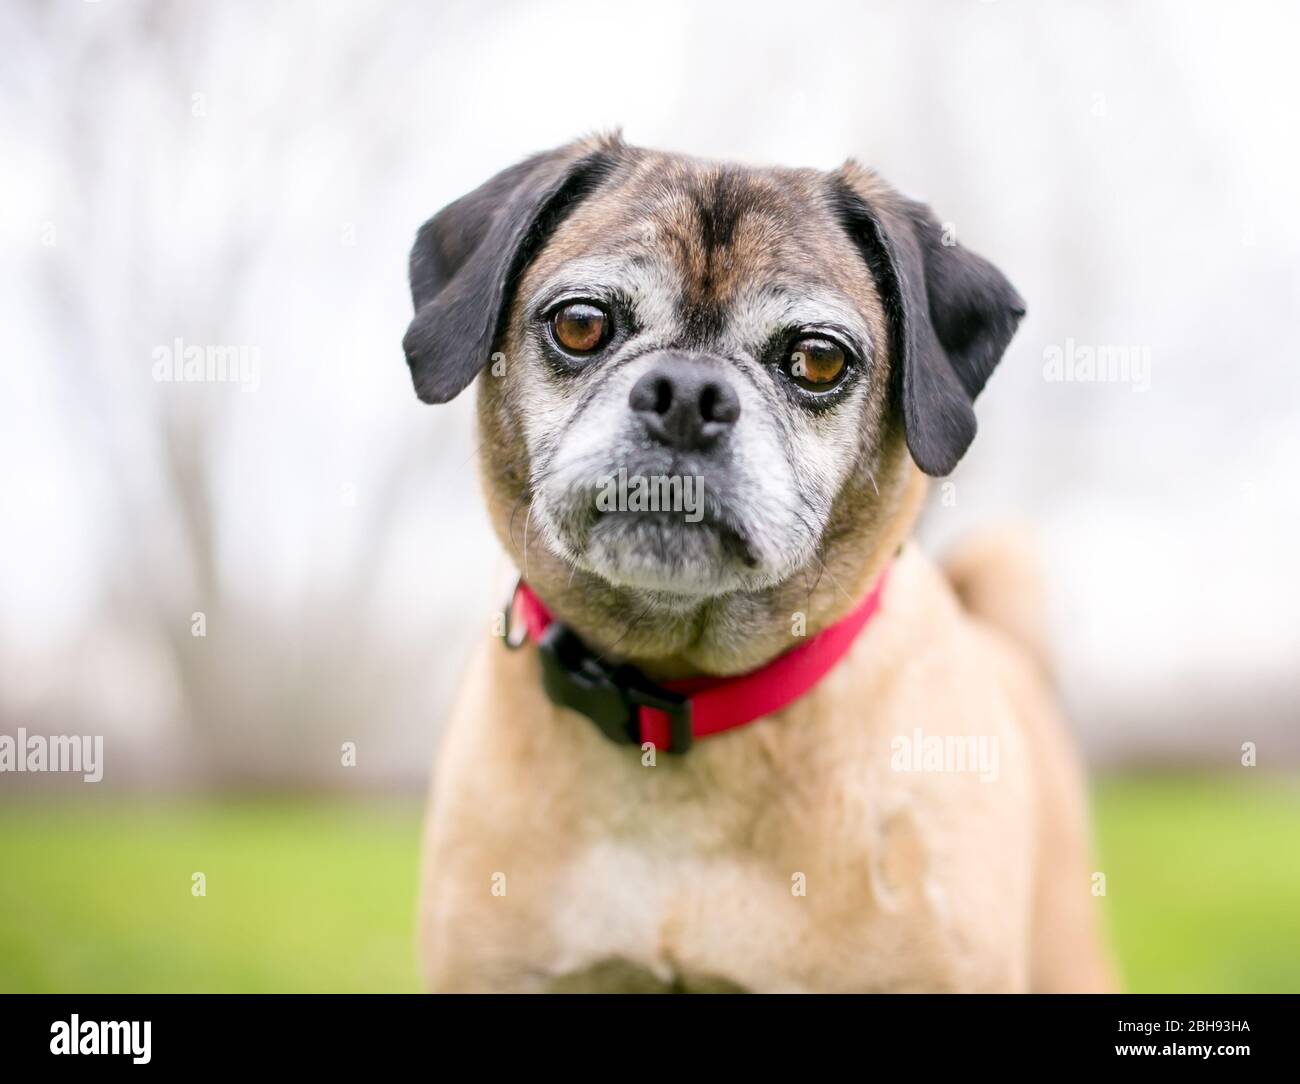 A Pug x Beagle mixed breed dog, also known as a 'Puggle', wearing a red collar Stock Photo